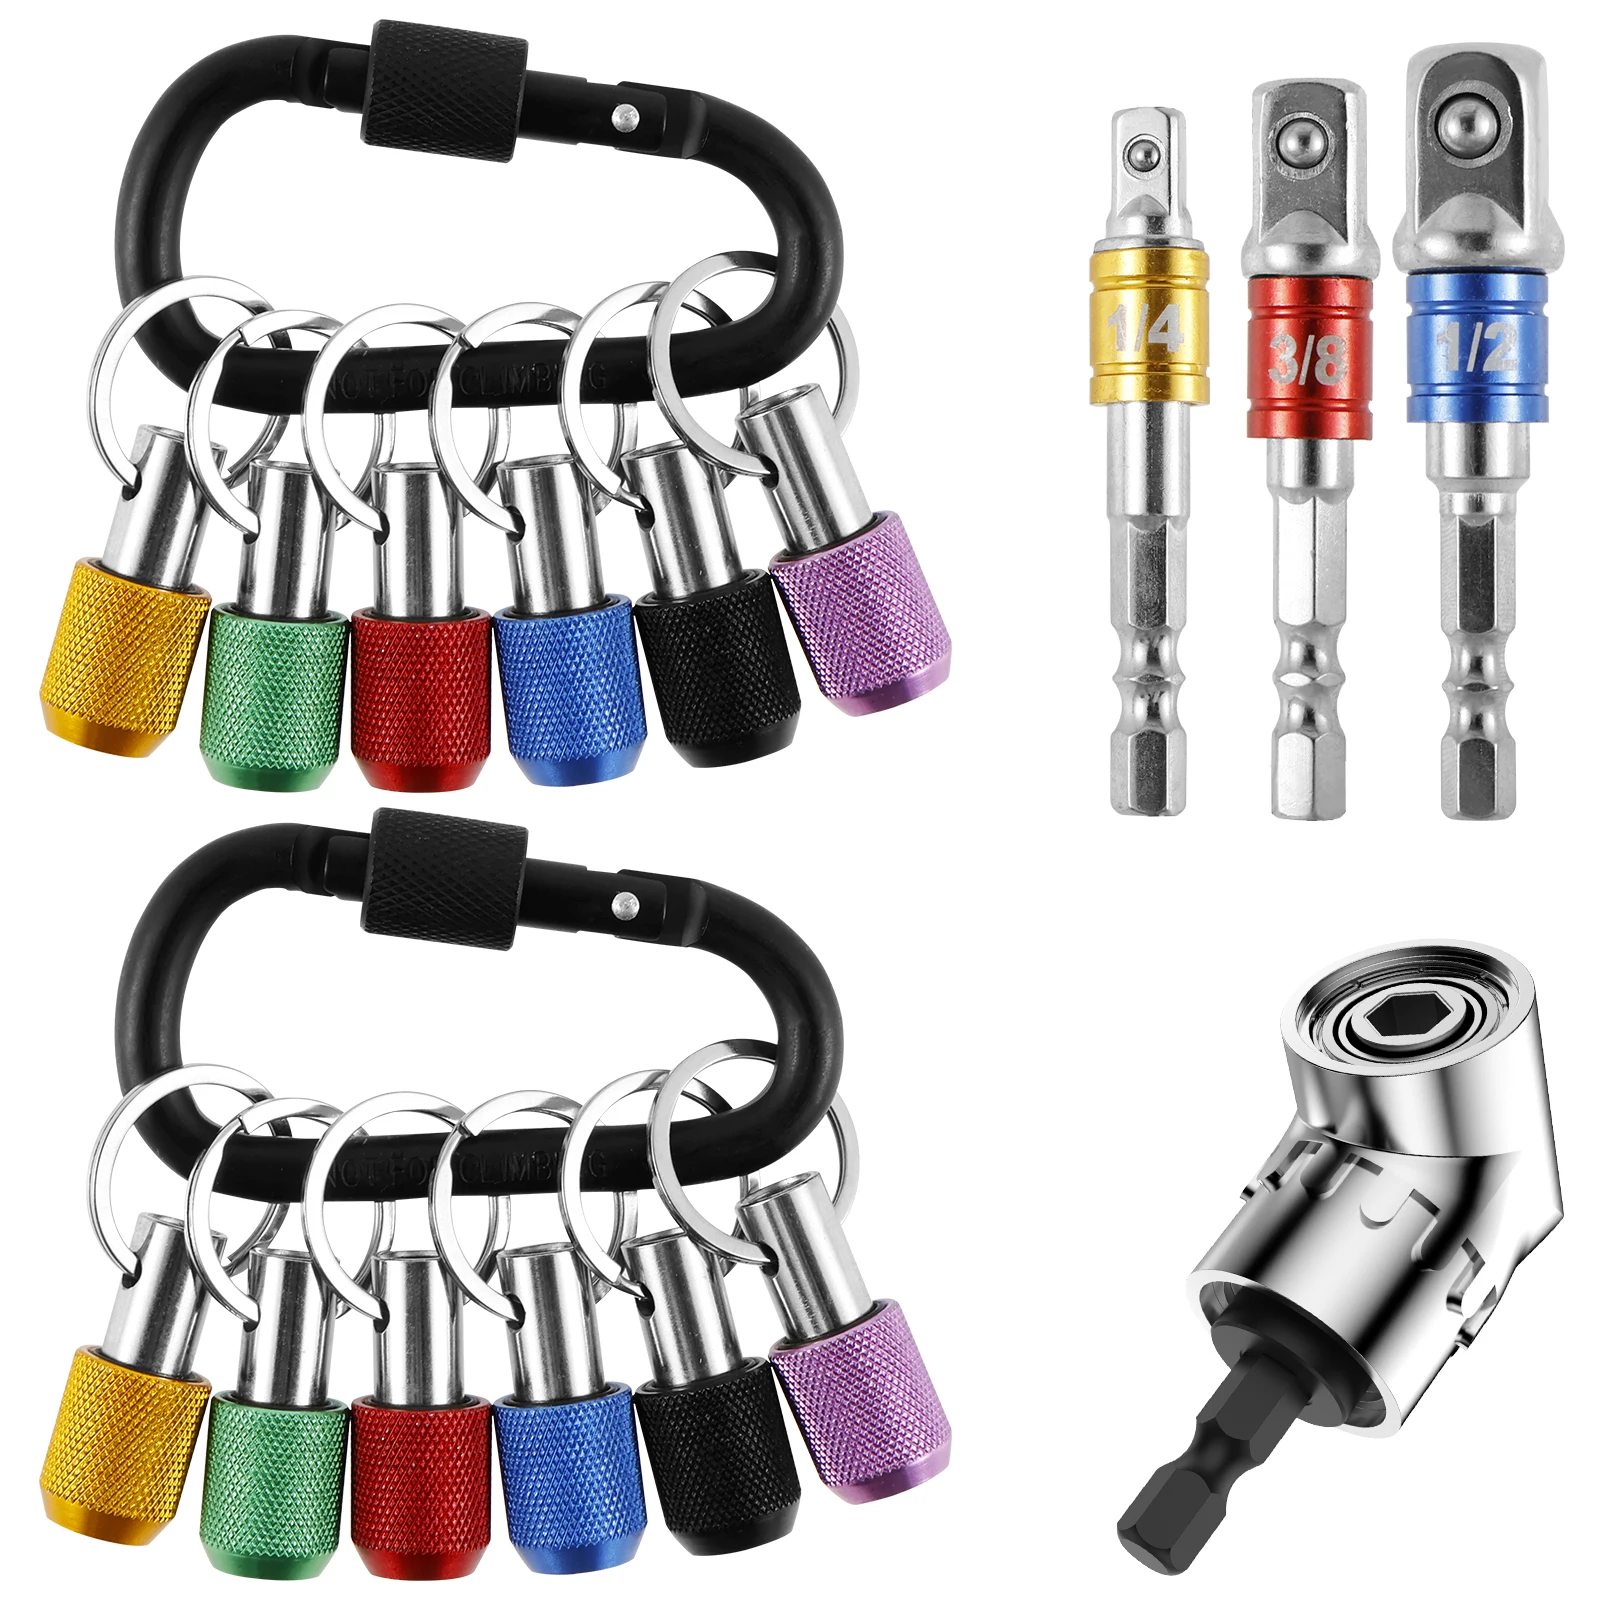 

12Pcs 1/4 Inch Hex Shank Screwdriver Bit Holder Universal Bit Holder Keychain with 105° Right Angle Drill Attachment 1/4inch